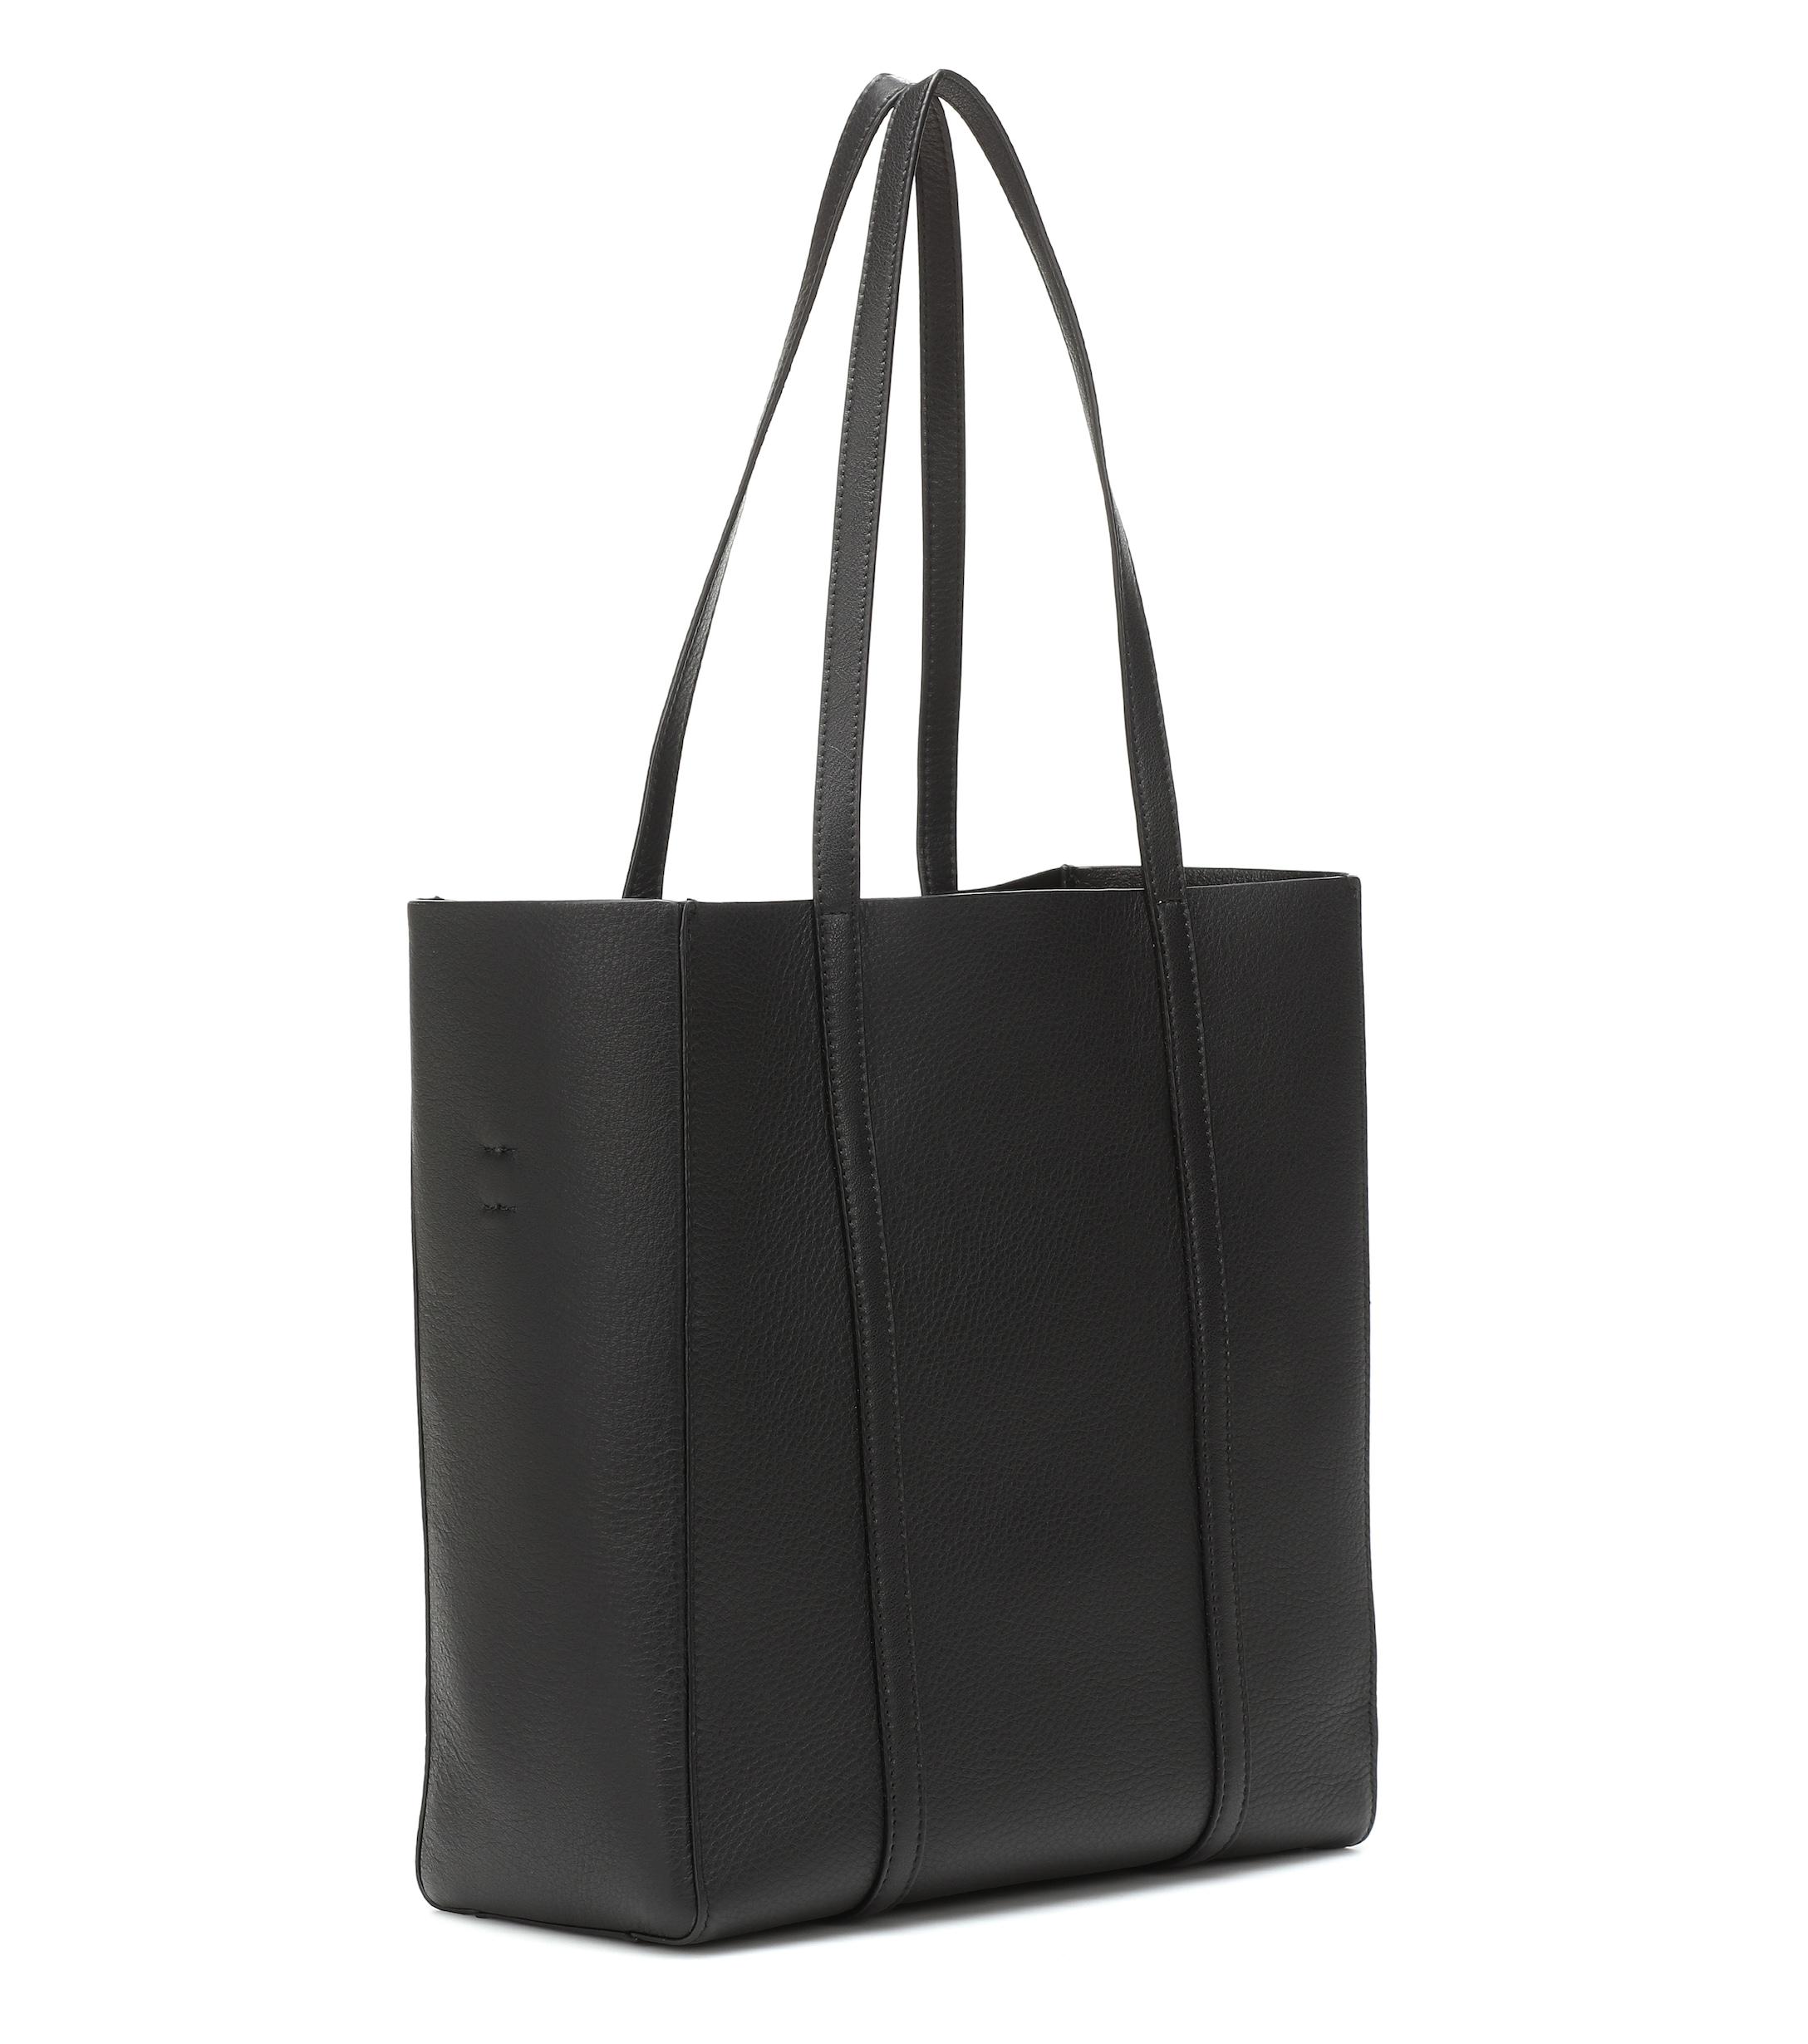 Balenciaga Everyday Xs Leather Tote in Black - Lyst